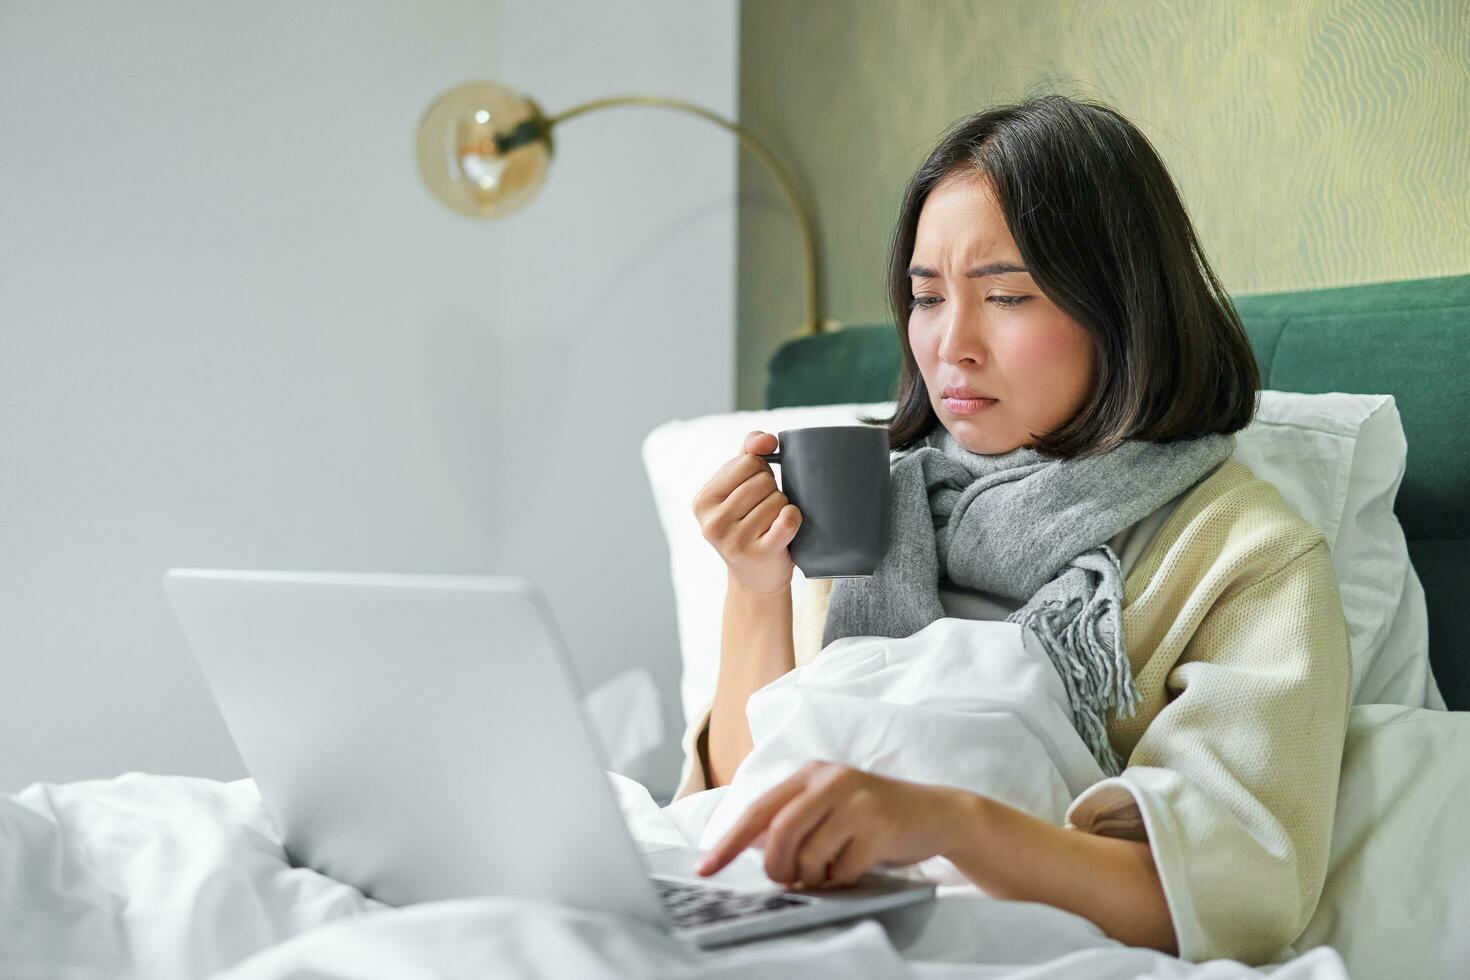 Asian girl looking at laptop, feeling sick, catching cold, drinking hot tea for sore throat, frowning as looking at computer screen photo